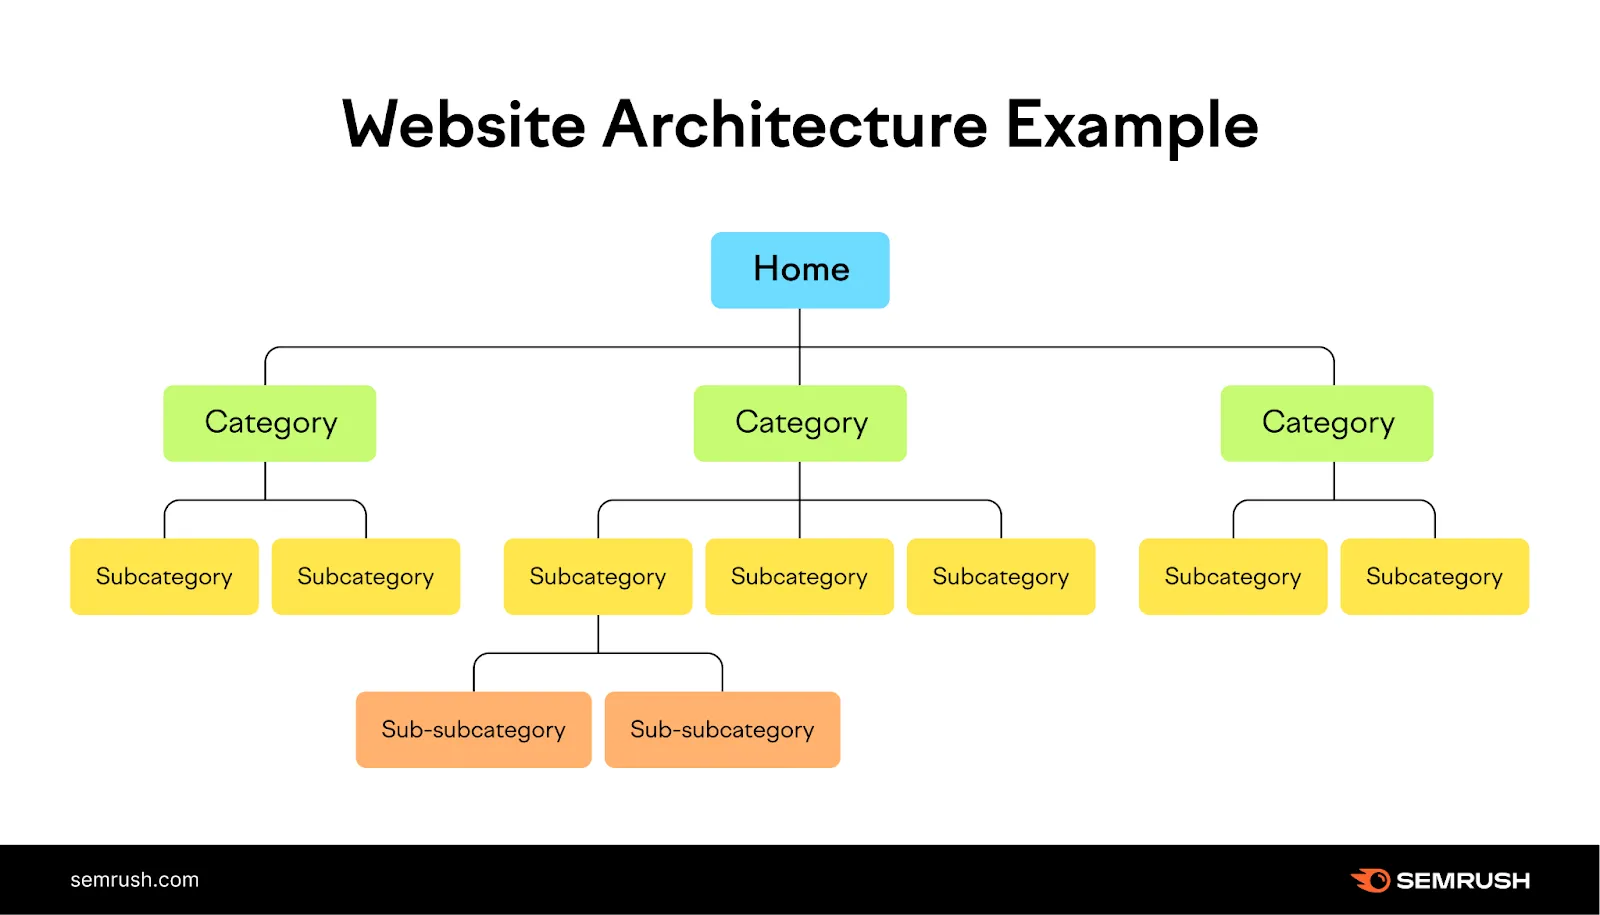 Website architecture explained by Semrush